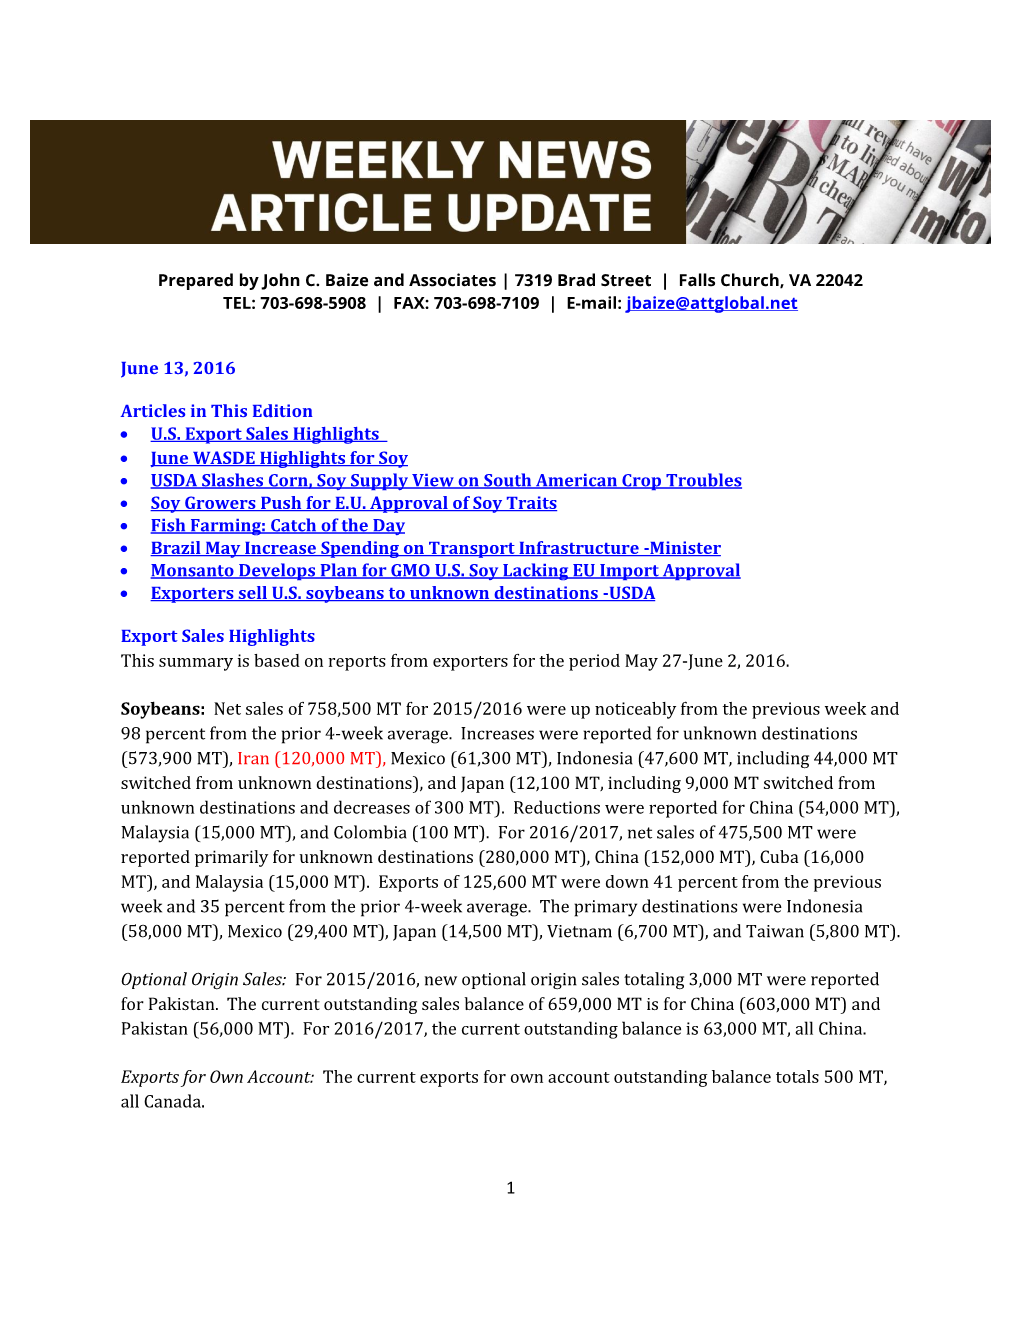 1 June 13, 2016 Articles in This Edition • U.S. Export Sales